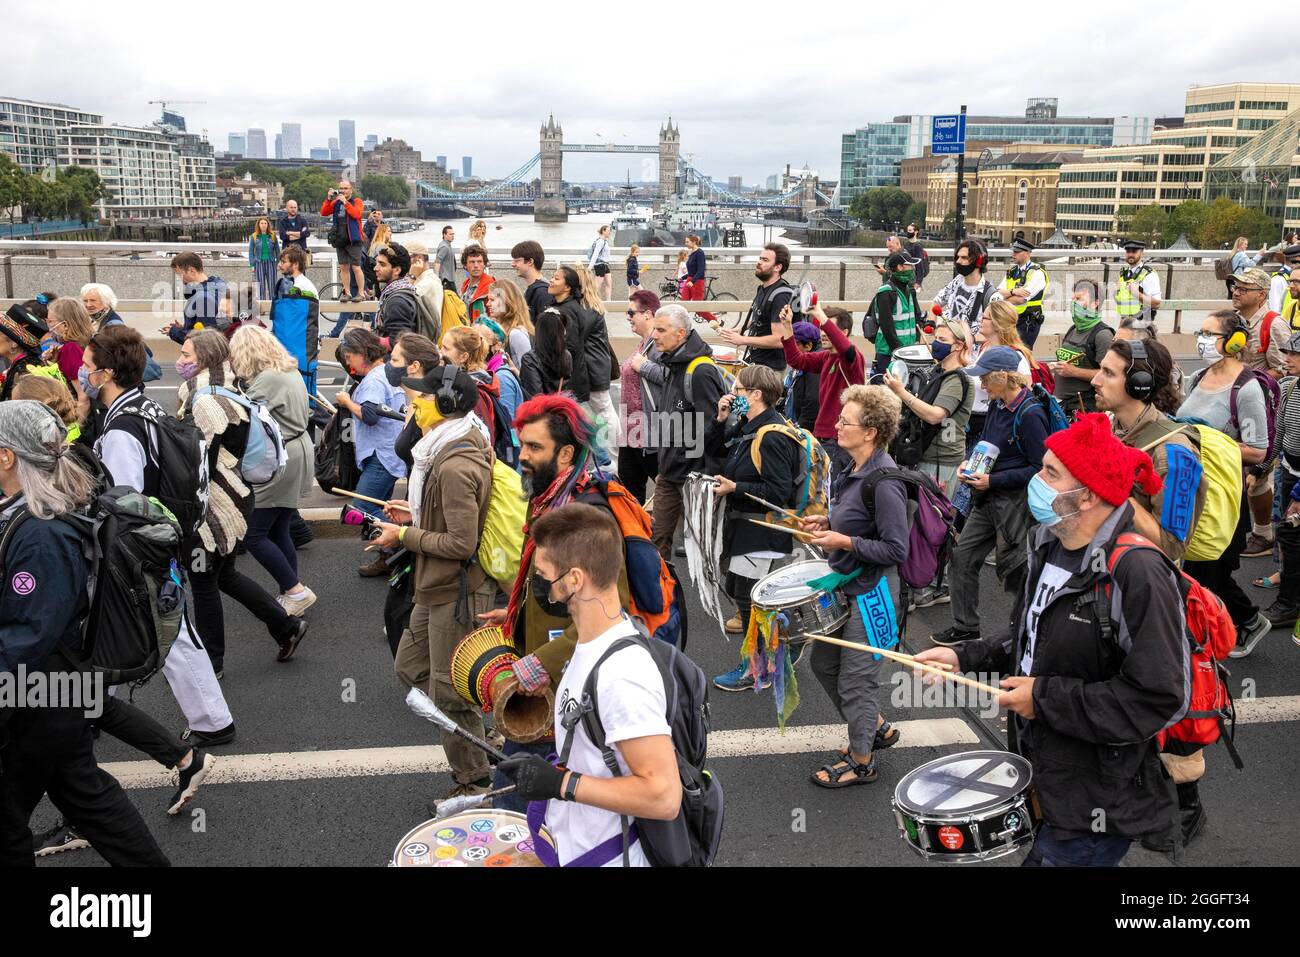 London, UK. 30th Aug, 2021. London, UK 30 8 21 Members of Extinction Rebellion march from The Shard to Tower Bridge where supporters climb on top of a caravan and block the road. Extinction Rebellion Credit: Mark Thomas/Alamy Live News Stock Photo